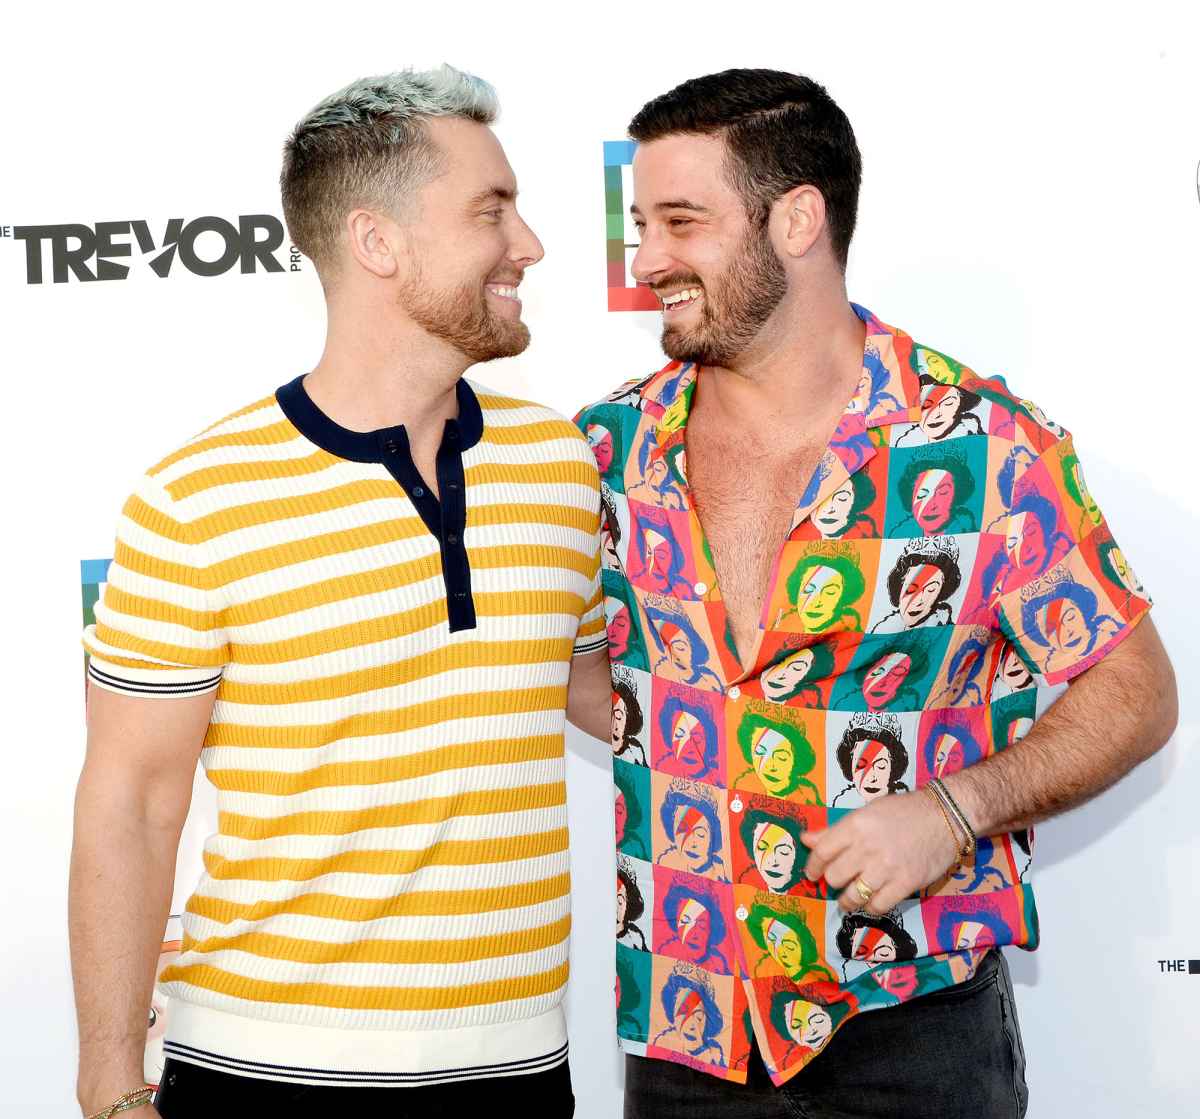 Lance Bass Marries Michael Turchin in California - The New York Times